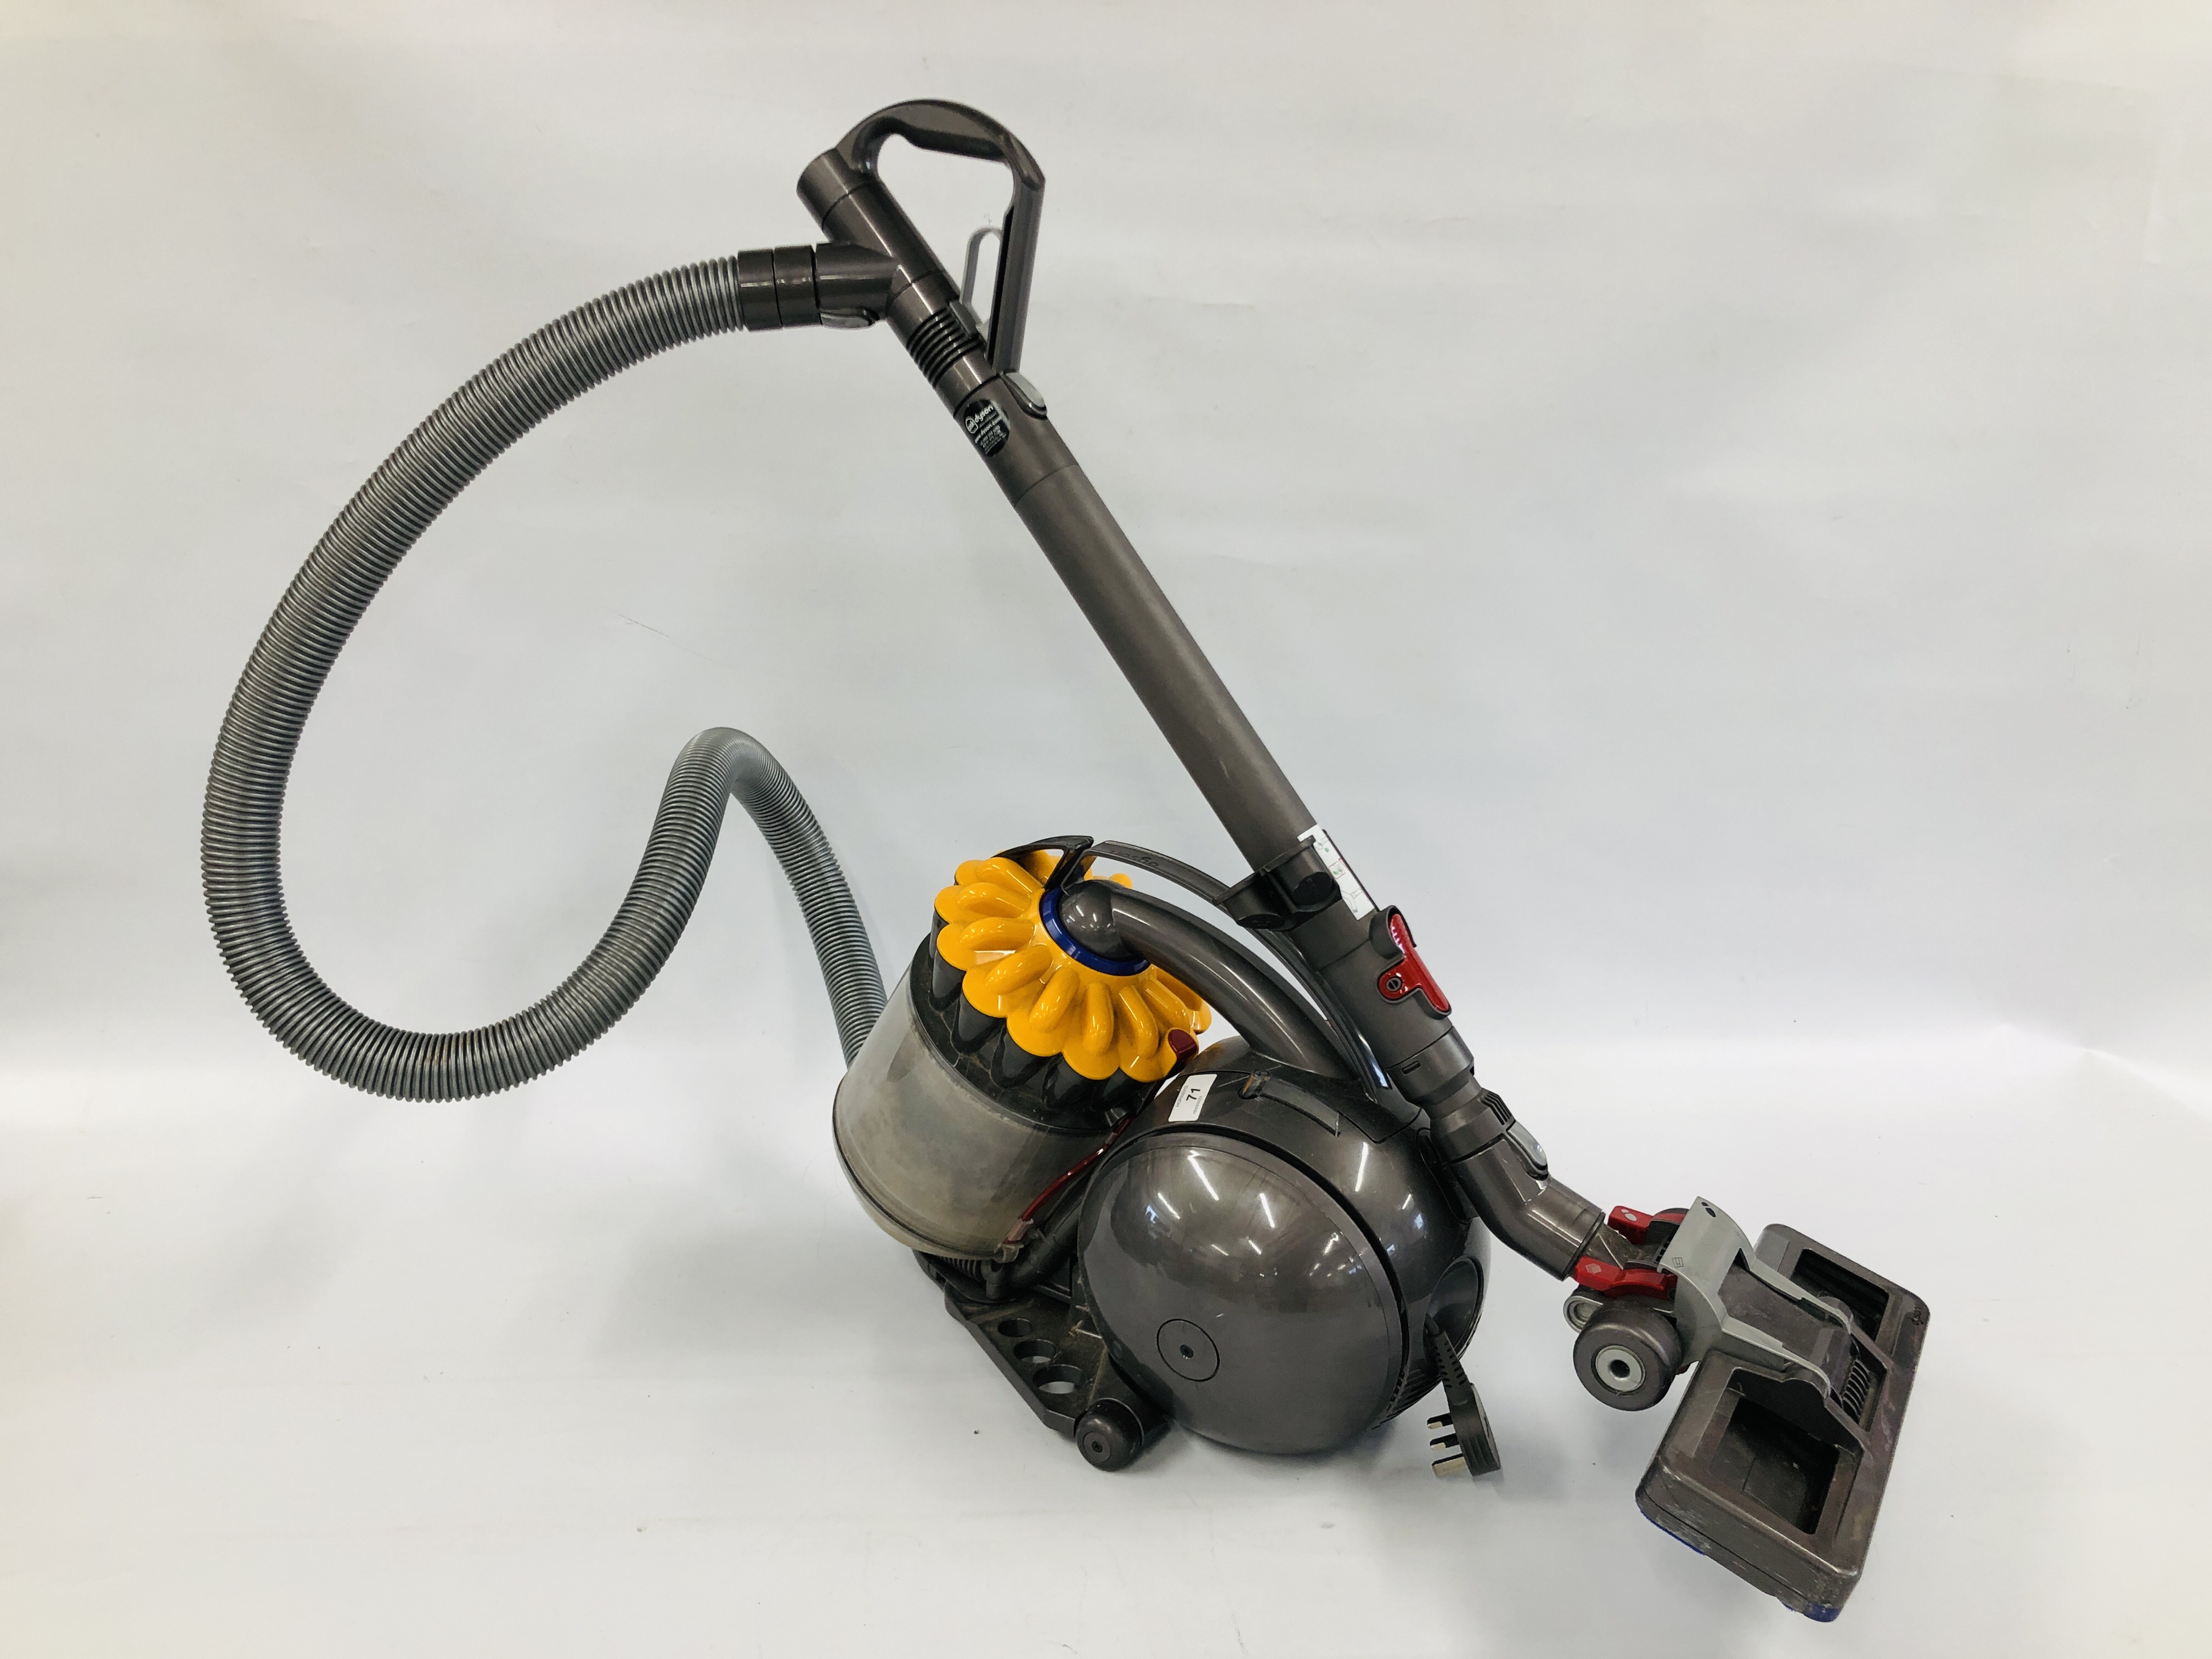 DYSON DC39 CYCLONE CYLINDER VACUUM CLEANER - SOLD AS SEEN